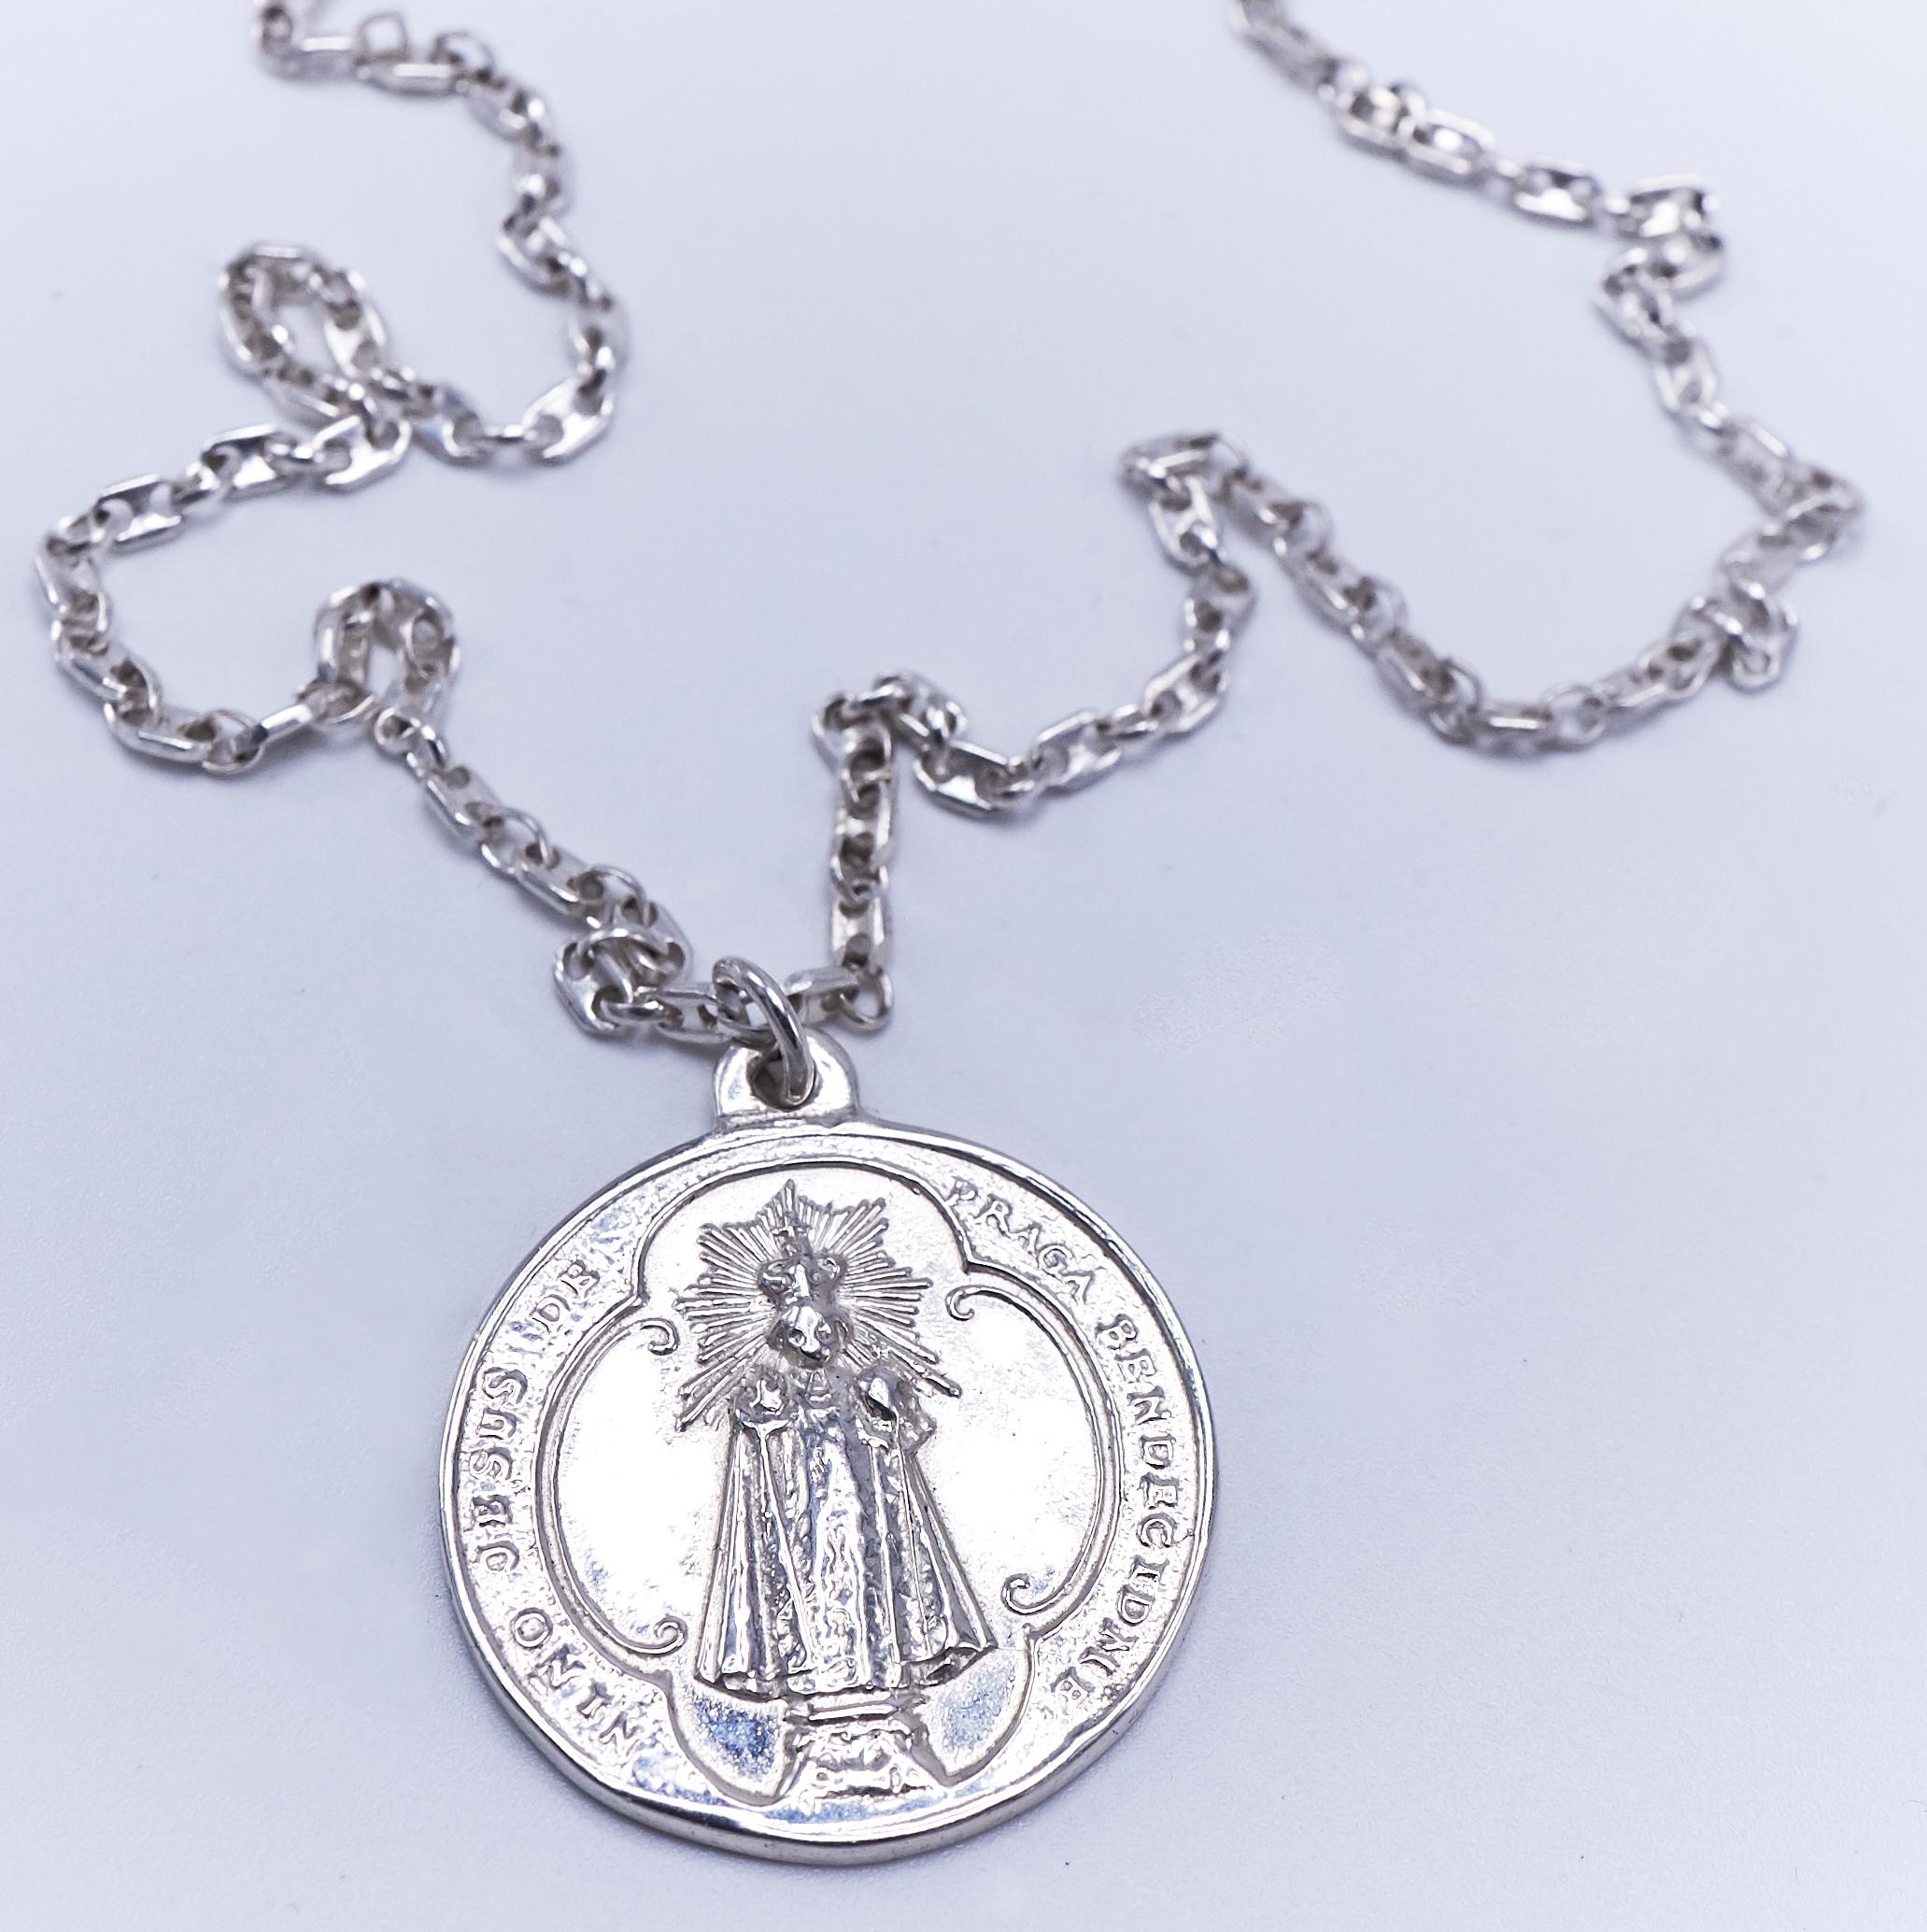 Contemporary Emerald Medal Chain Necklace Silver Miraculous Virgin Mary J Dauphin For Sale